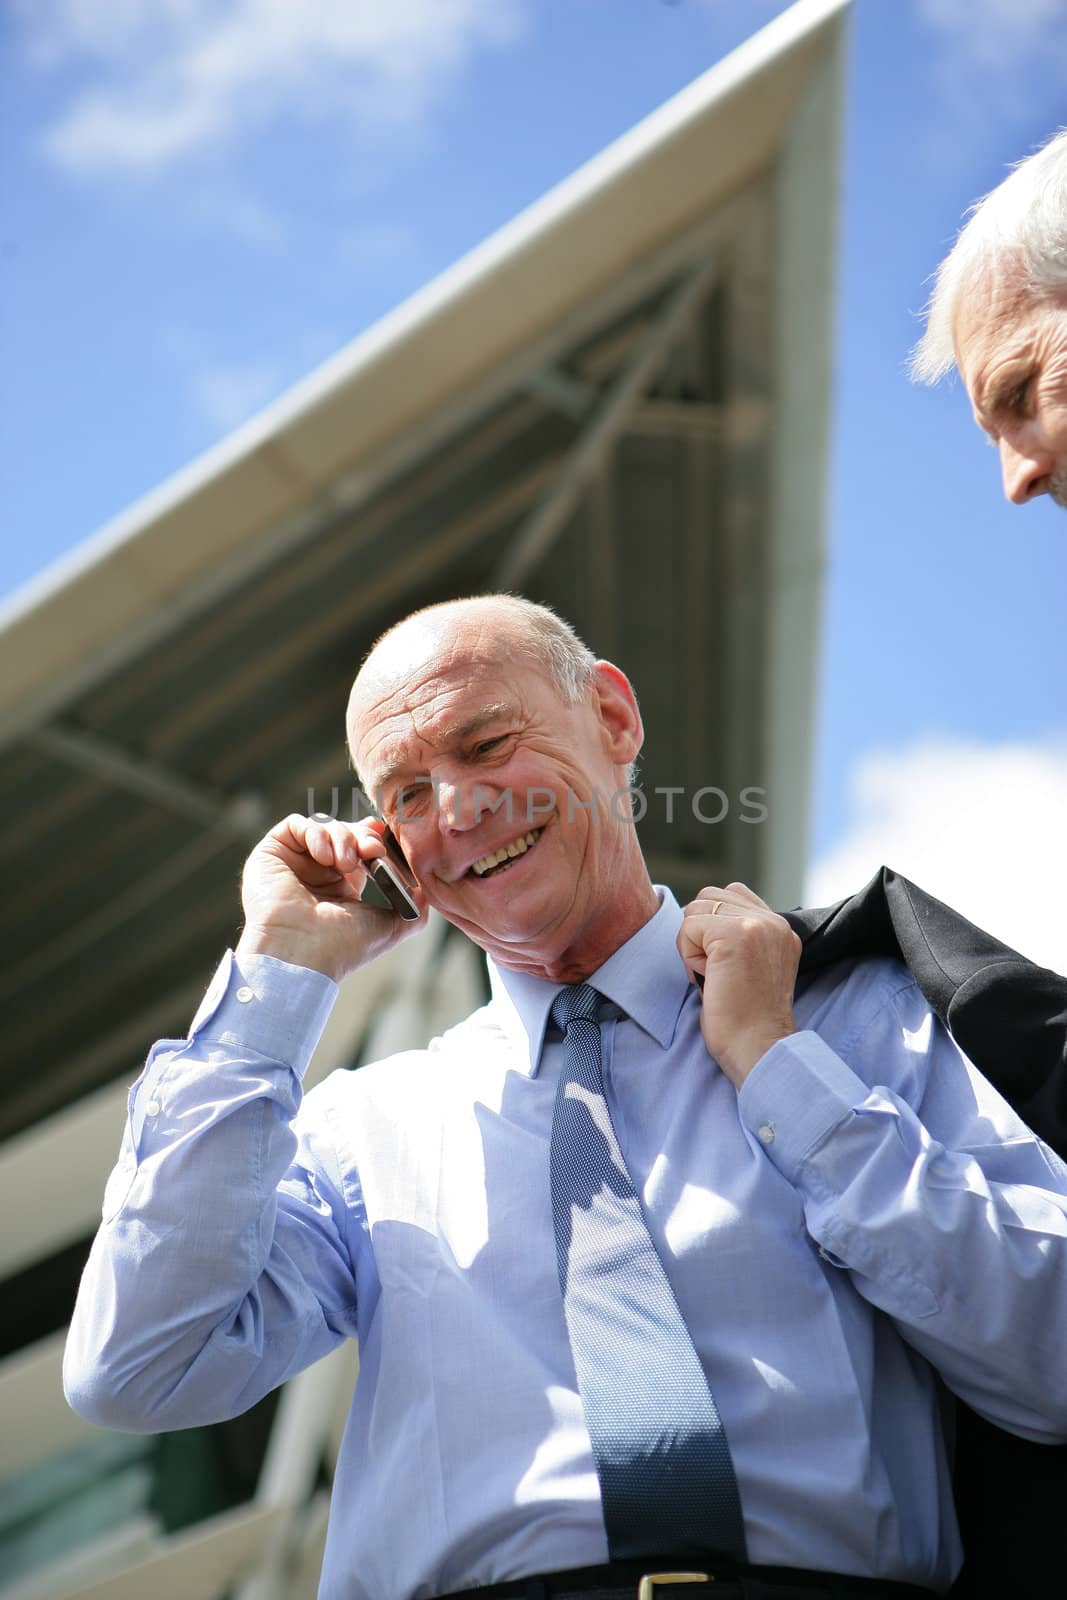 Smiling businessman on the phone by phovoir